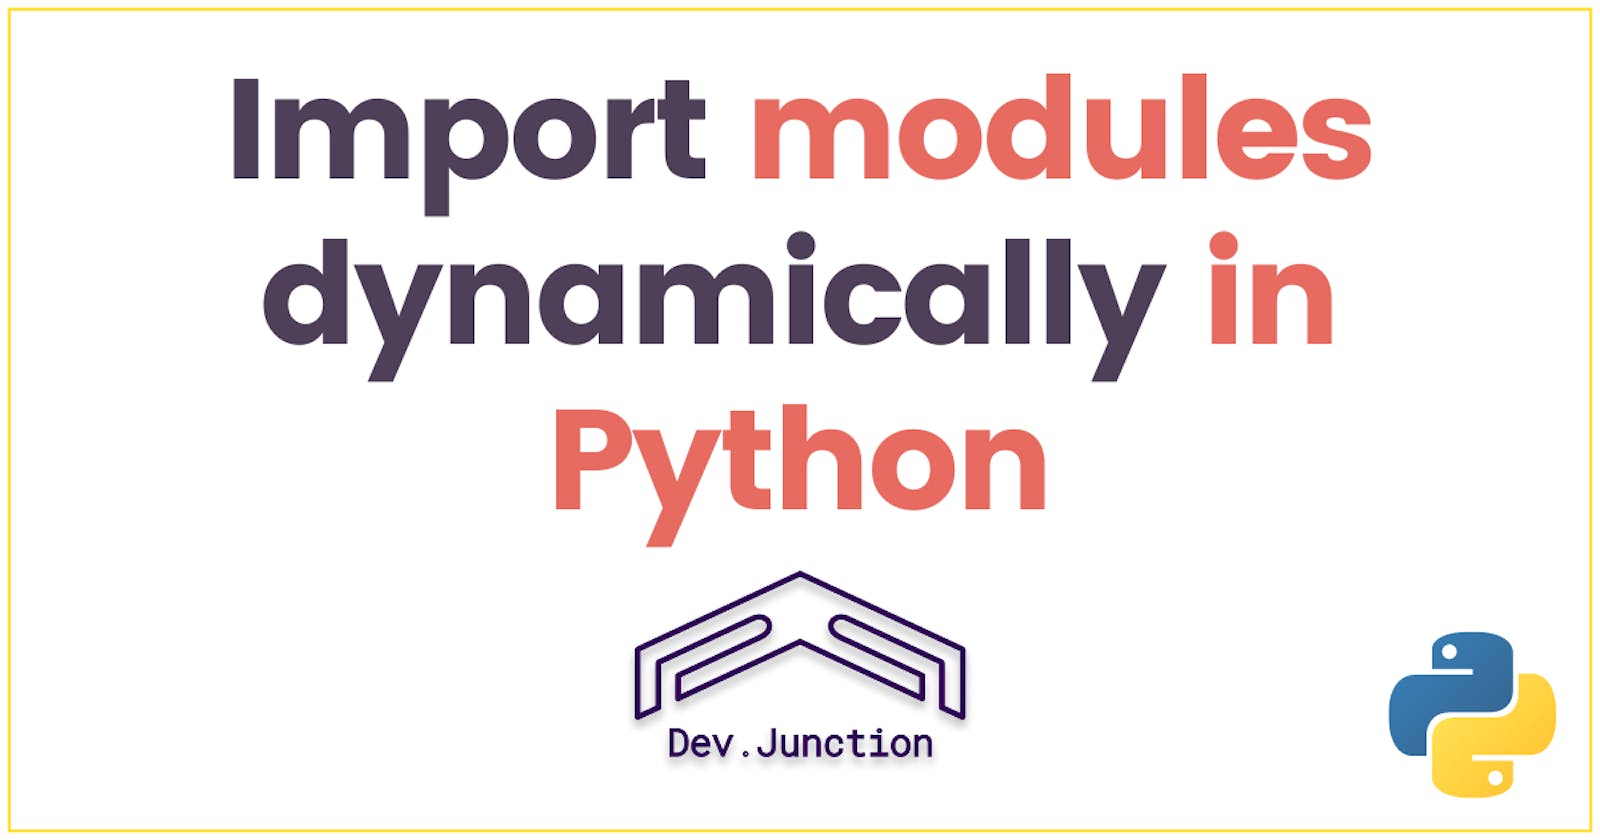 How to import modules from string in Python?